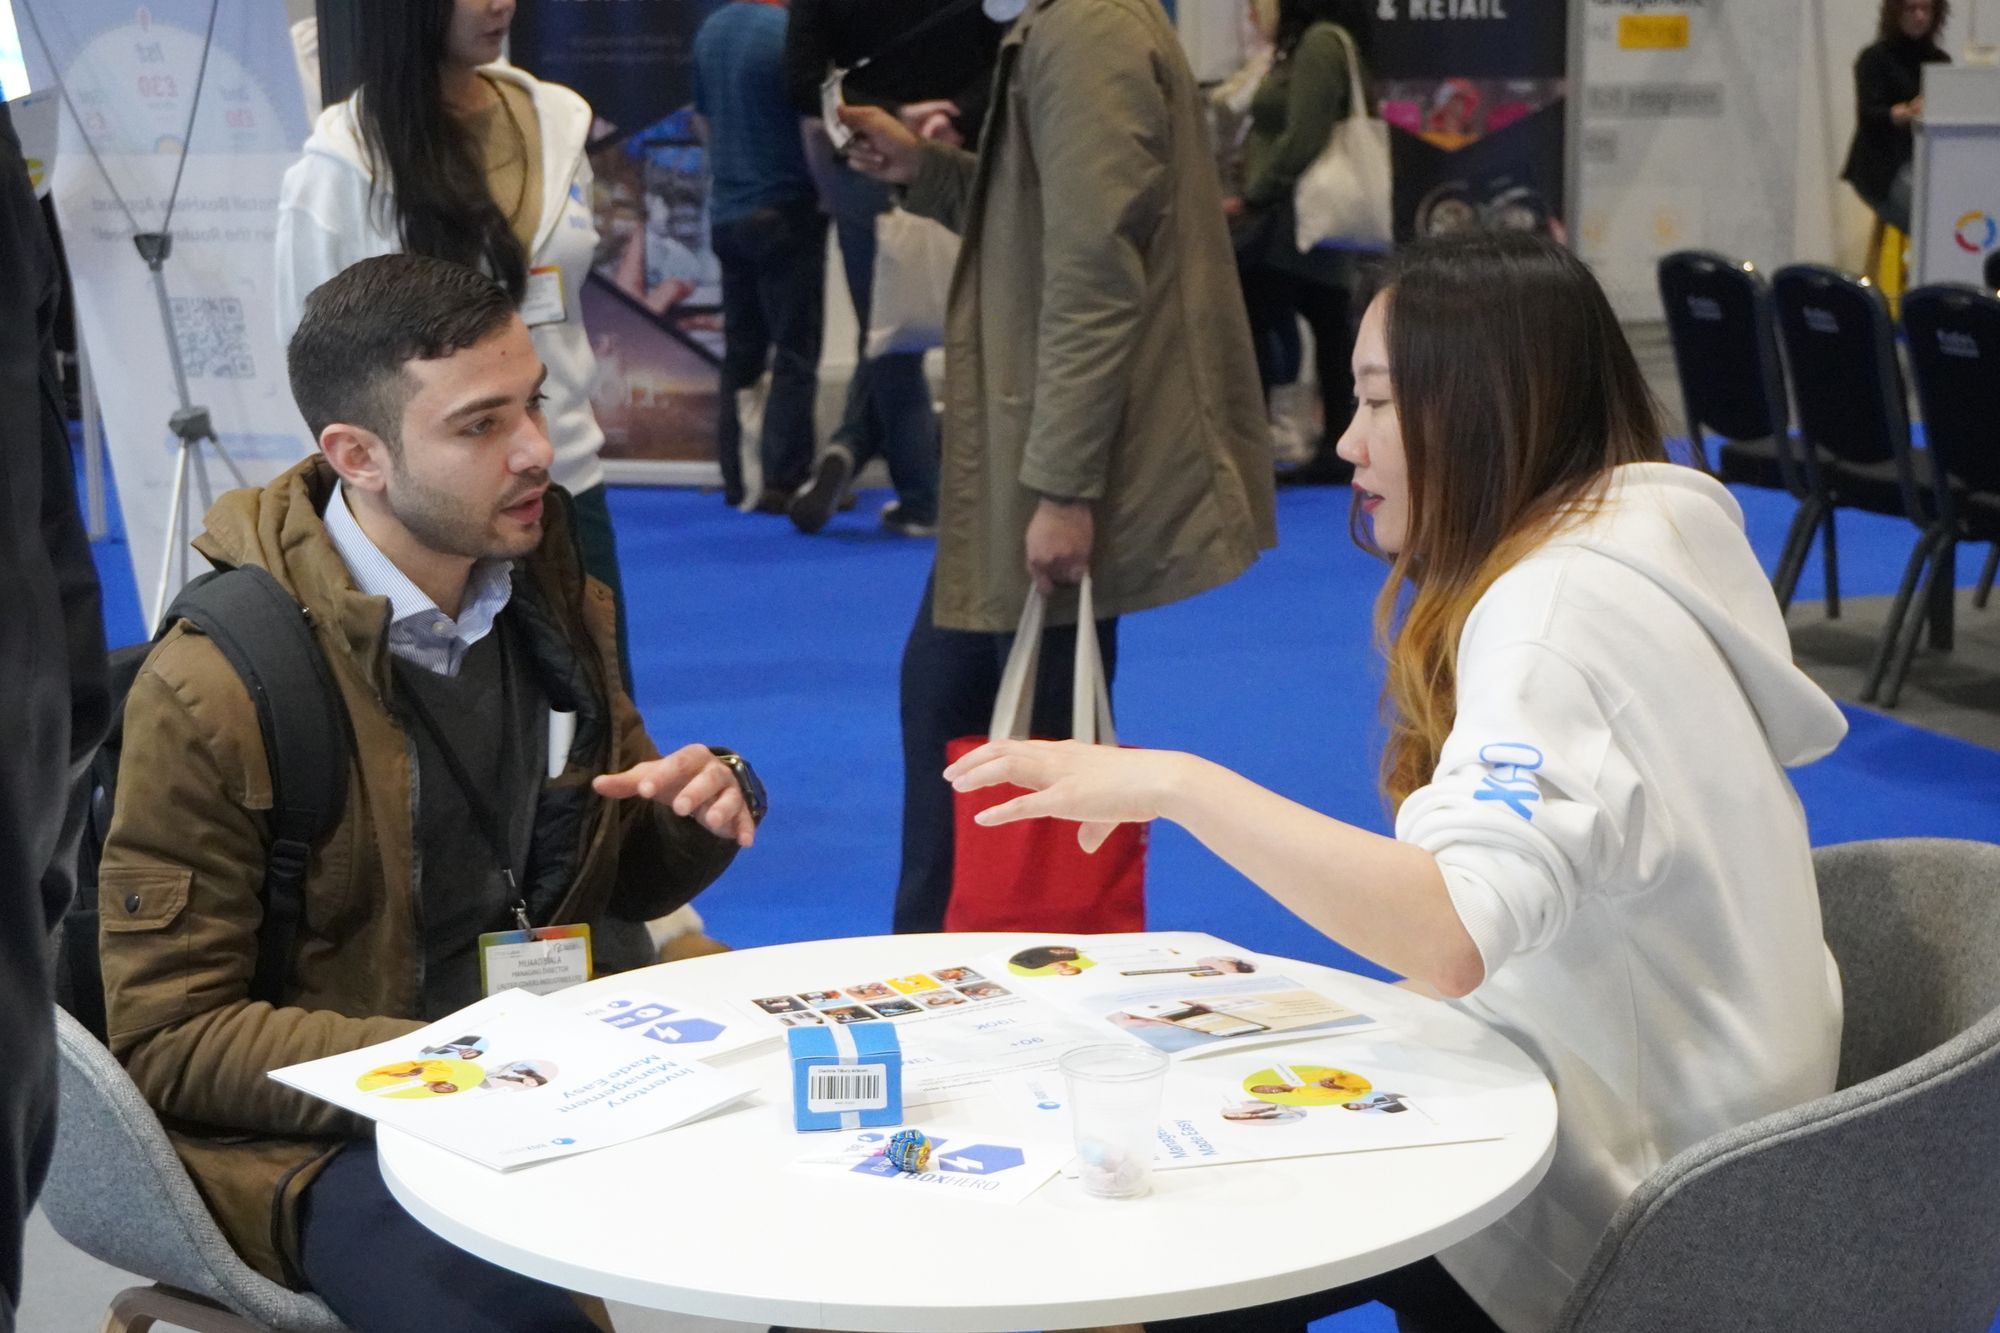 A team member sitting at a table, explaining BoxHero to the booth visitor